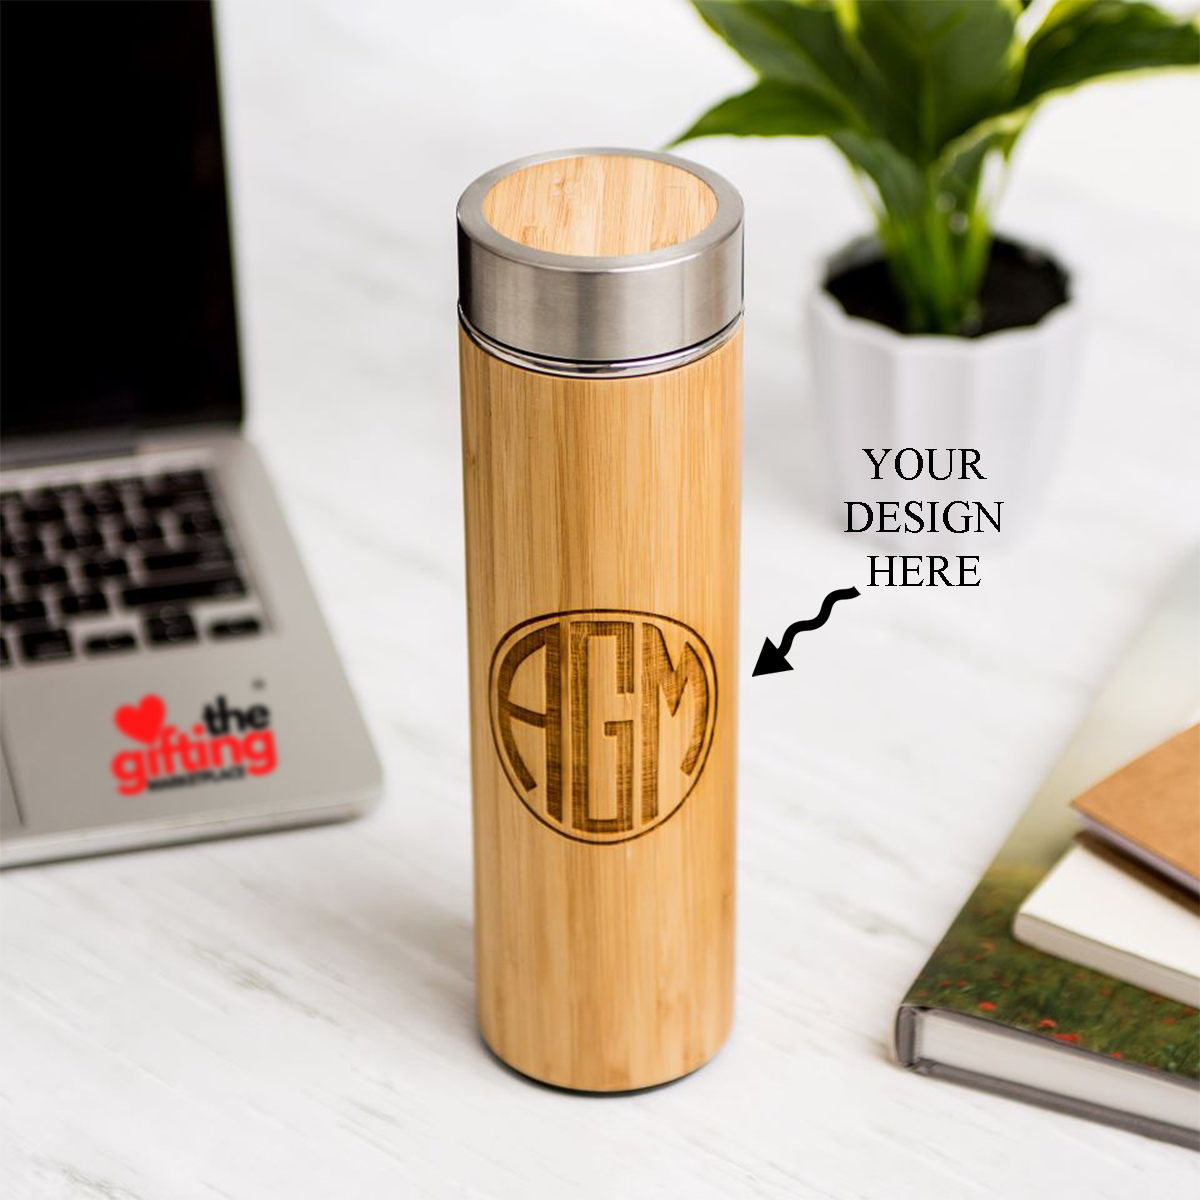 Personalized Engraved Insulated Double Wall Bamboo Water Bottle - For Return Gift, Corporate Gifting, Office or Personal Use HK10234